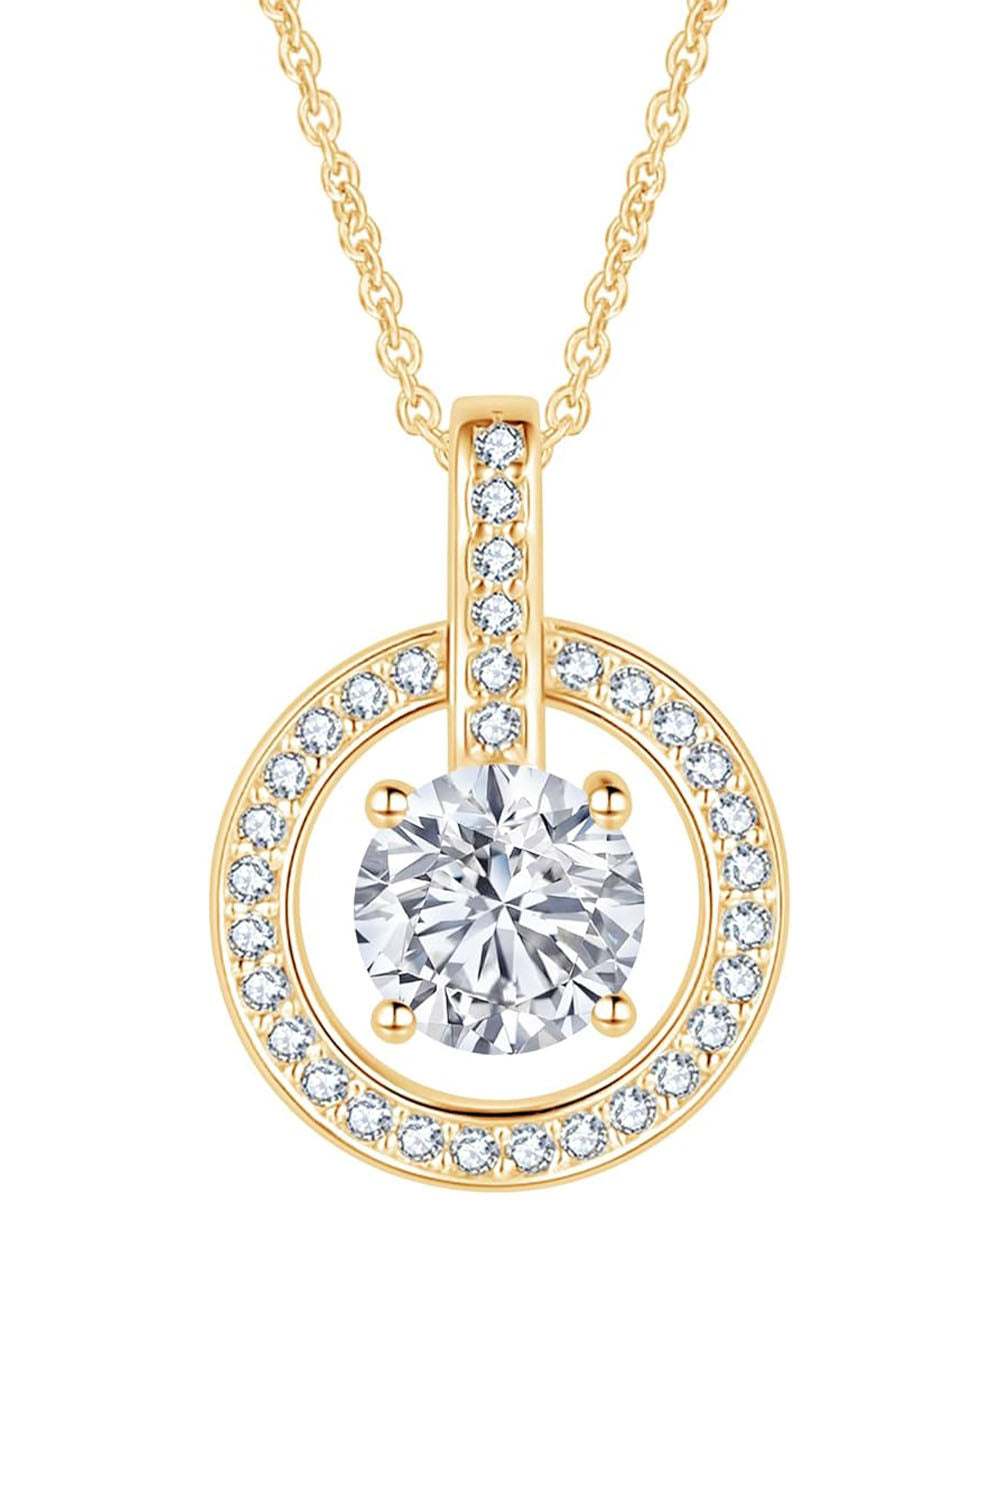 1 Carat (Ctw) Moissanite Halo Solitaire Pendant Necklace in 18K Gold Plated Sterling Silver.